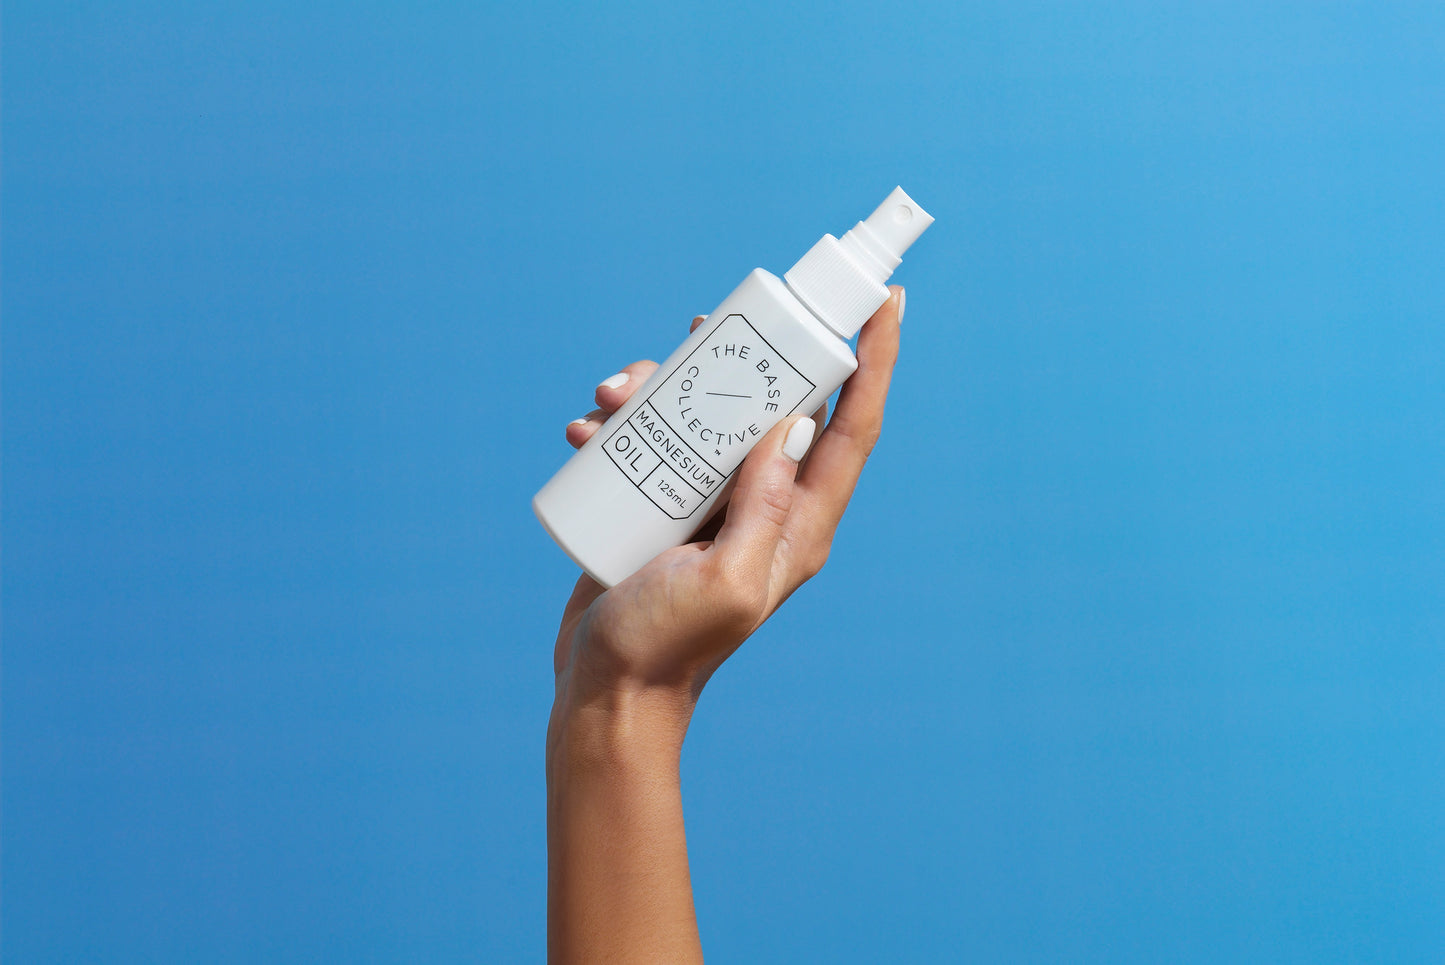 The Base Collective - Magnesium Oil Spray